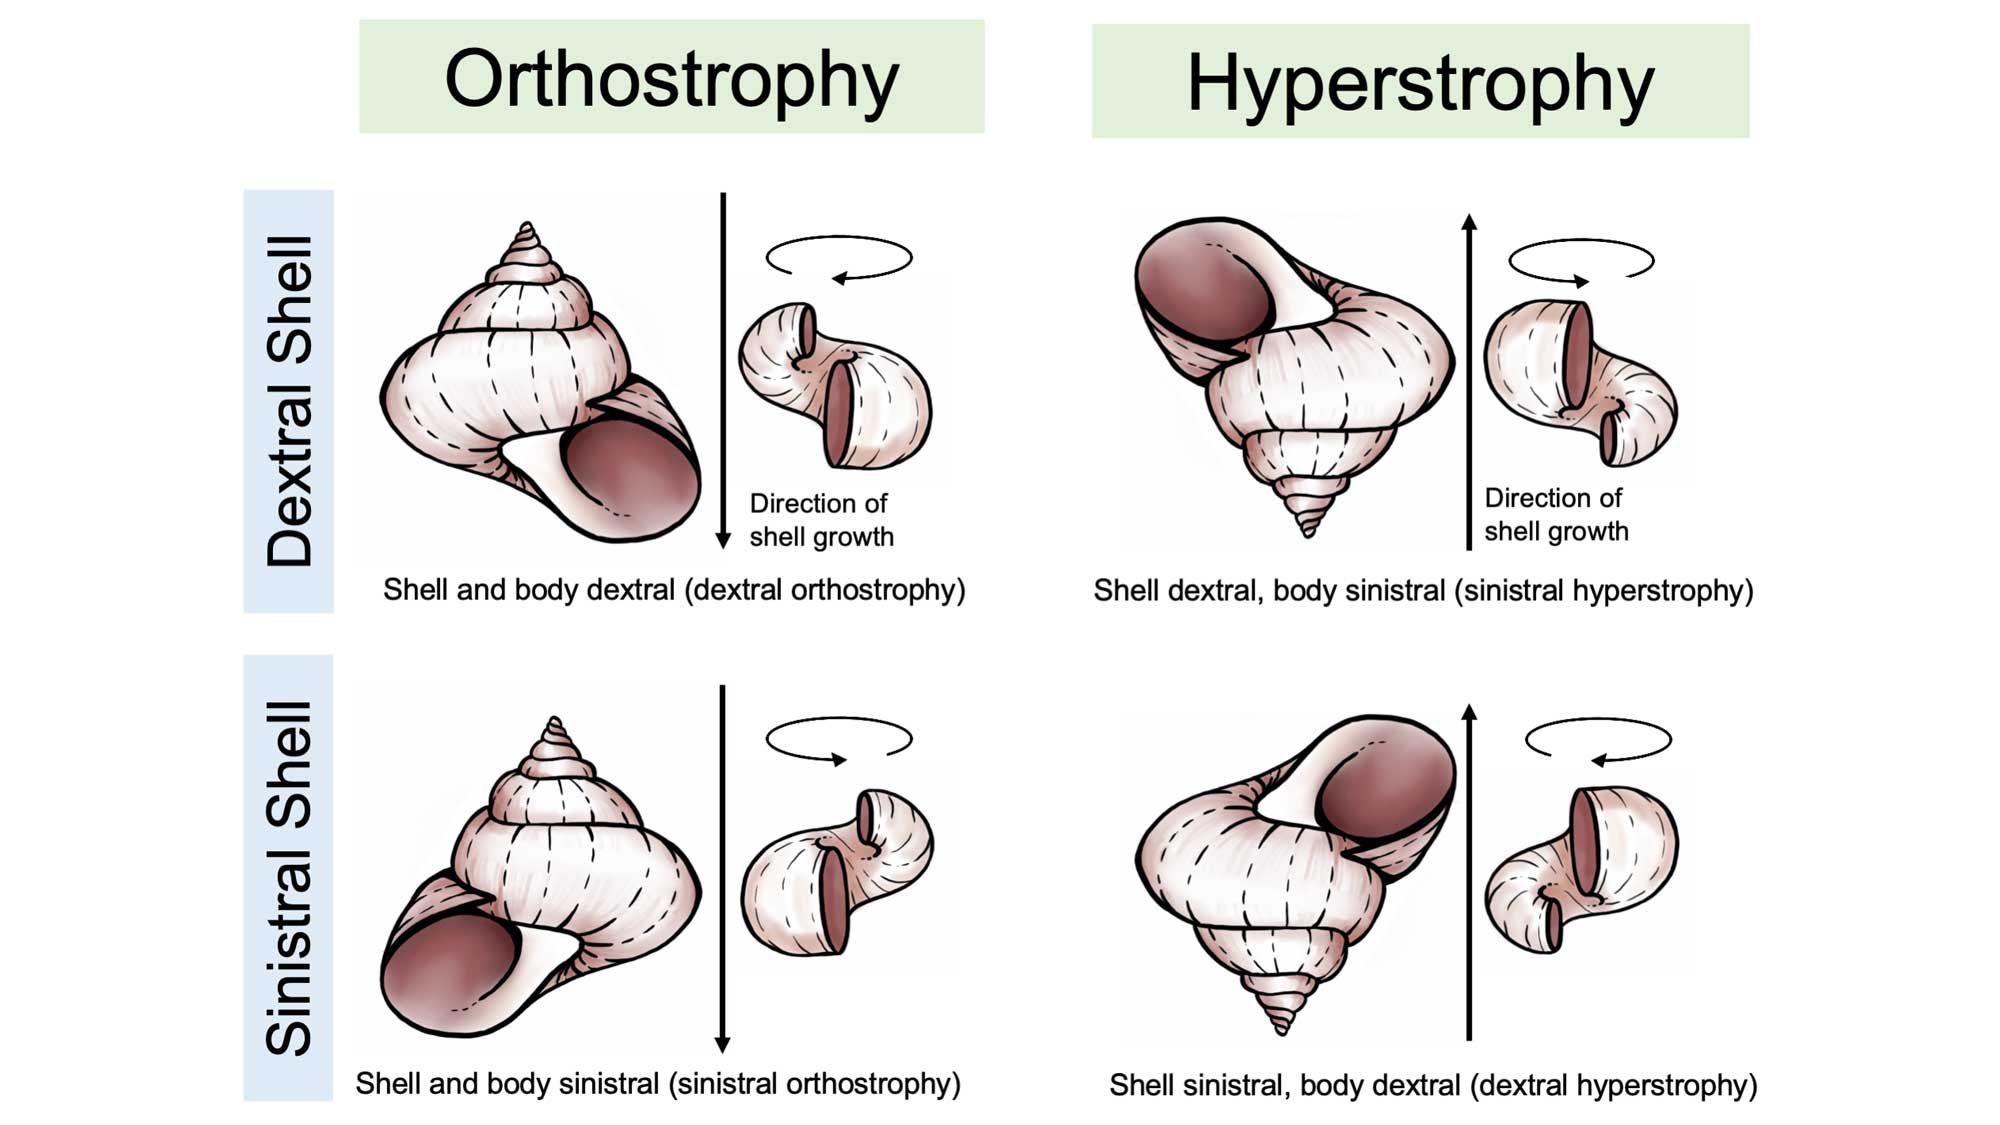 Diagram showing differences between orthostrophic and hyperstrophic gastropod shells.